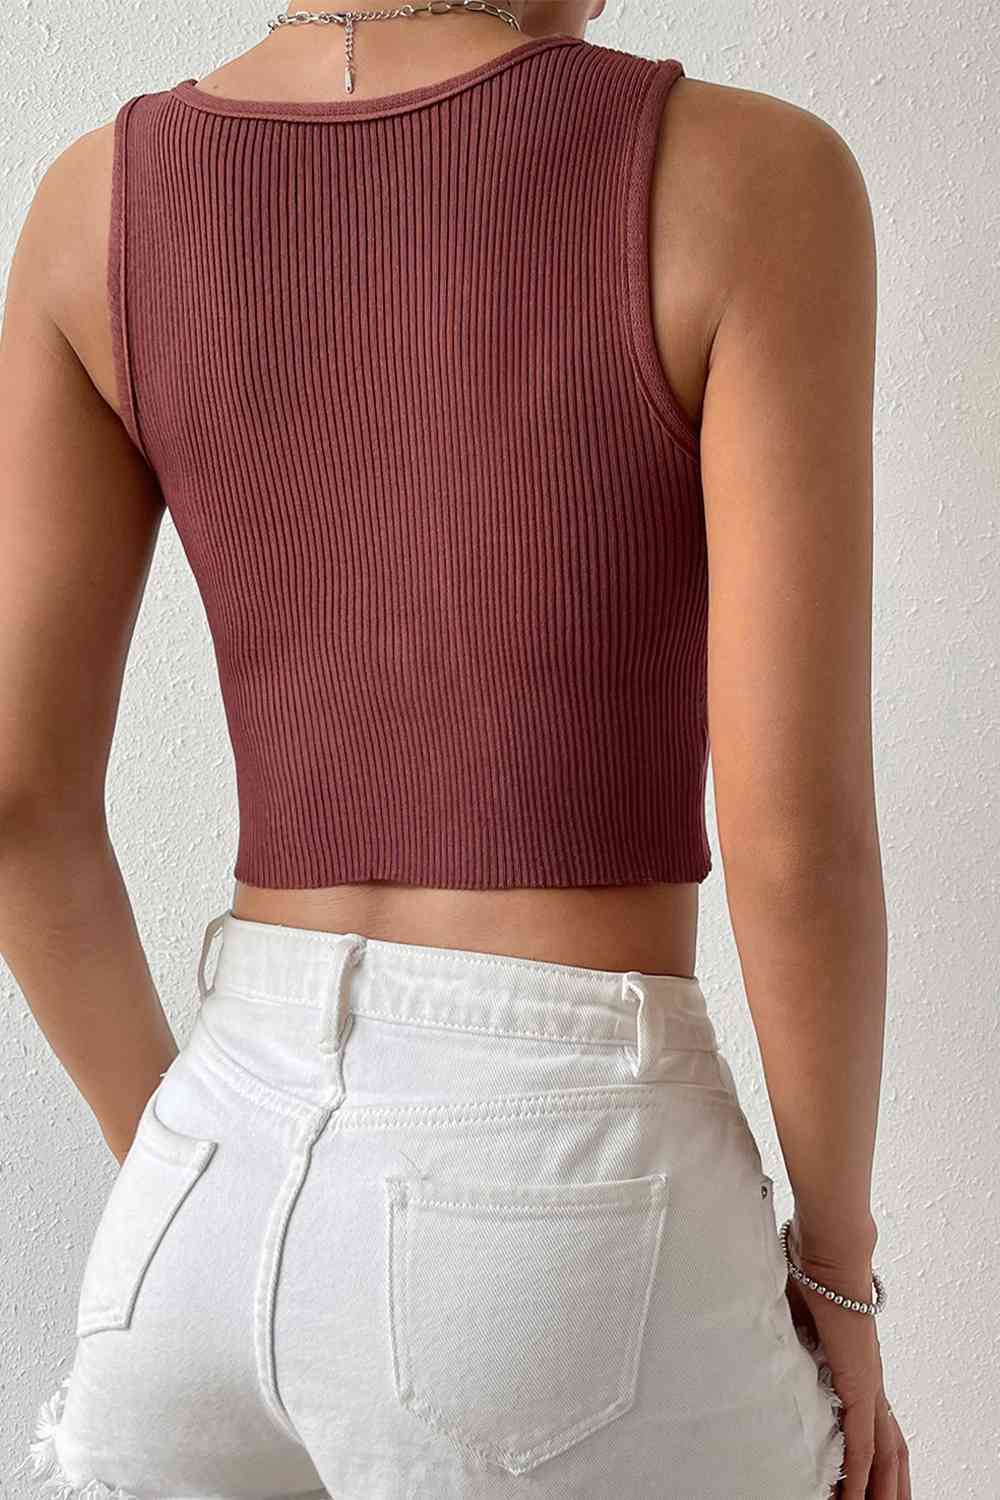 Ribbed Round Neck Crop Top - Global Village Kailua Boutique